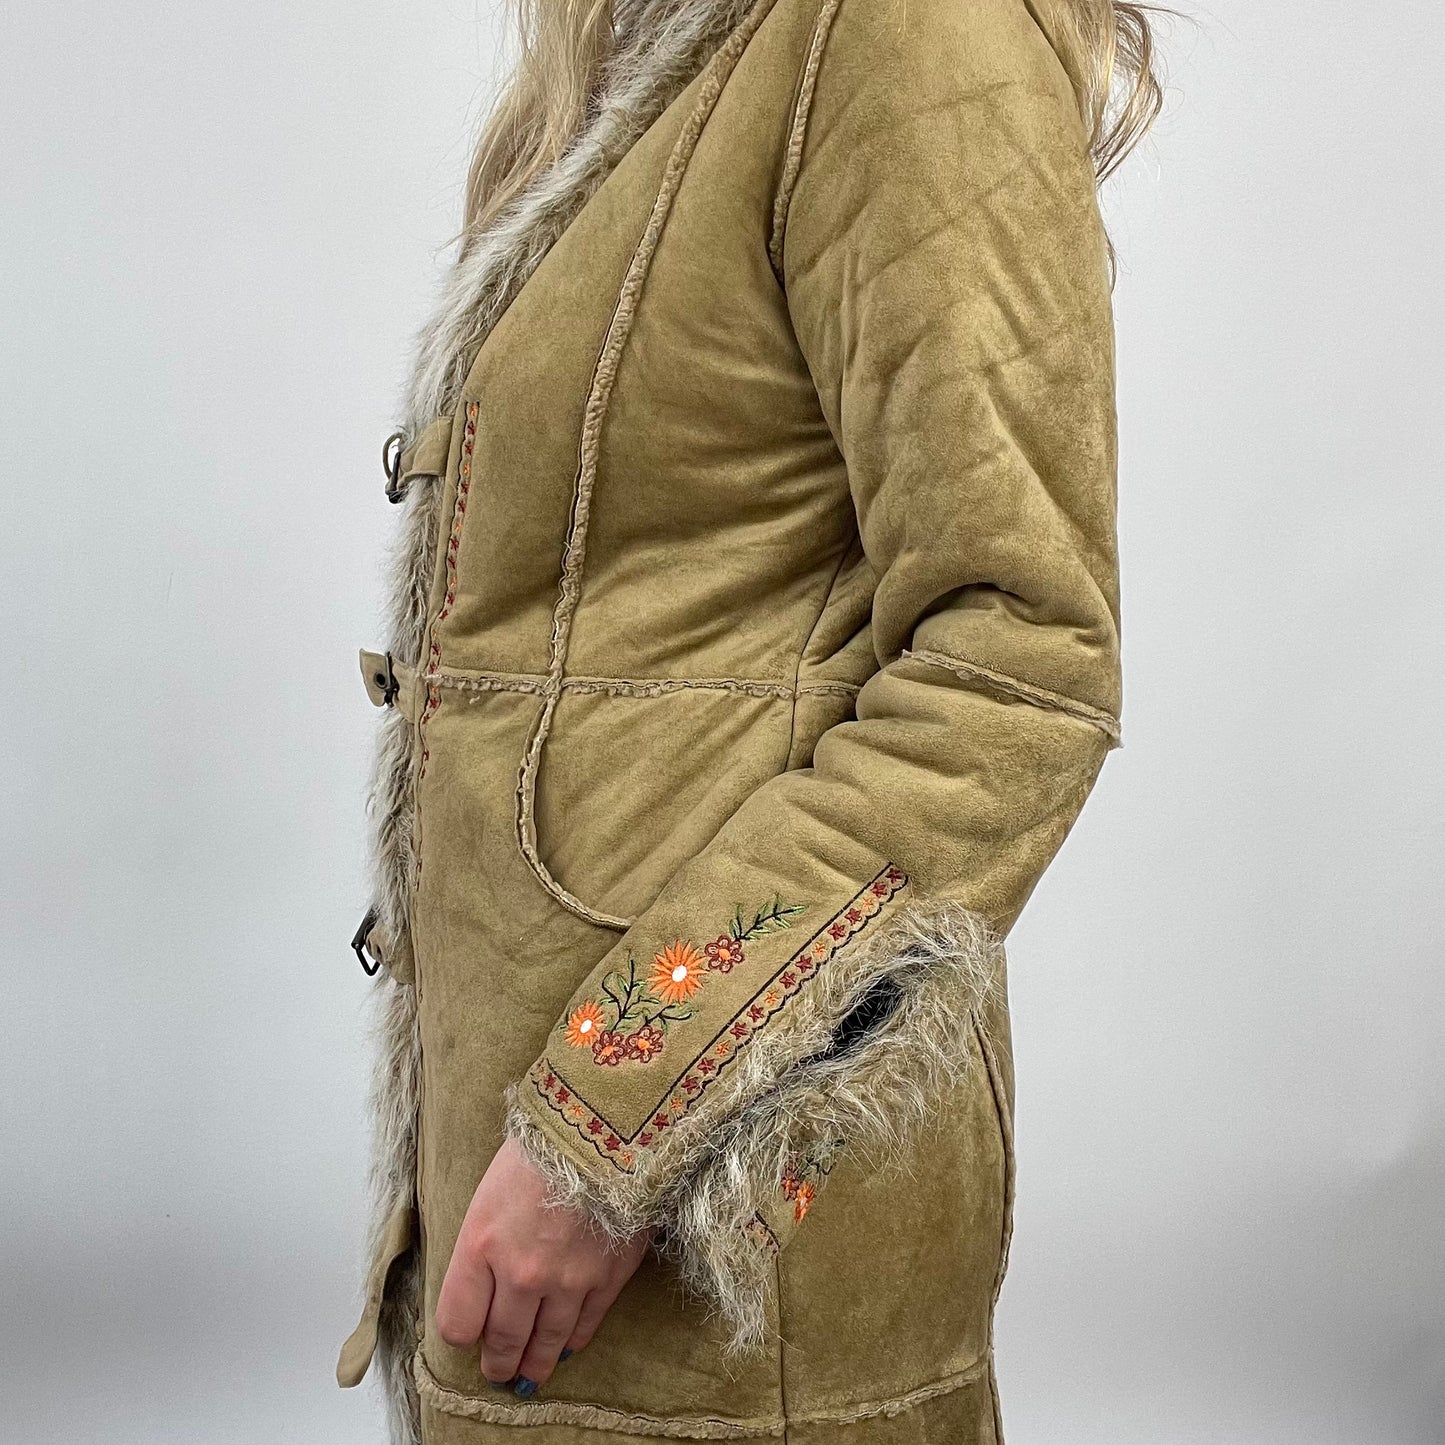 HIPPY CHIC DROP | large tan afghan coat with embroidered arms